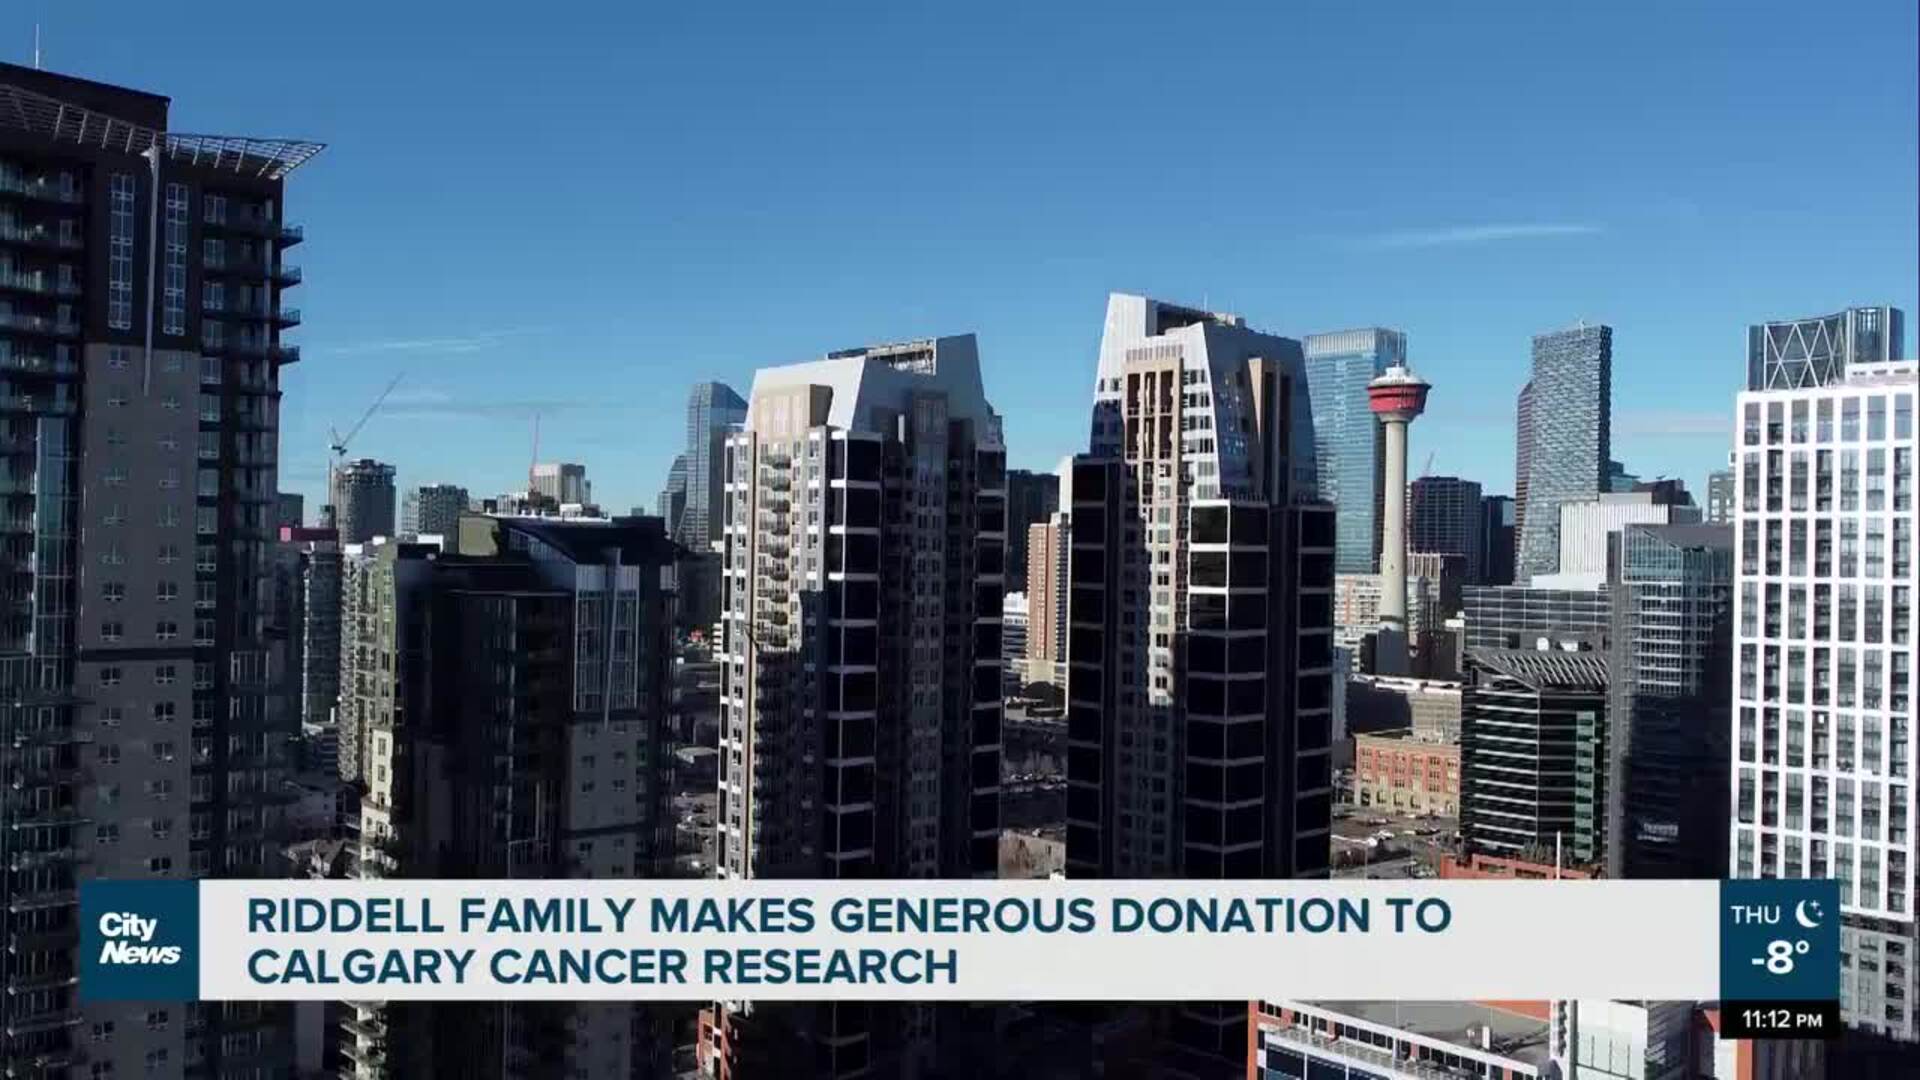 Riddell family makes generous donation to Calgary cancer research